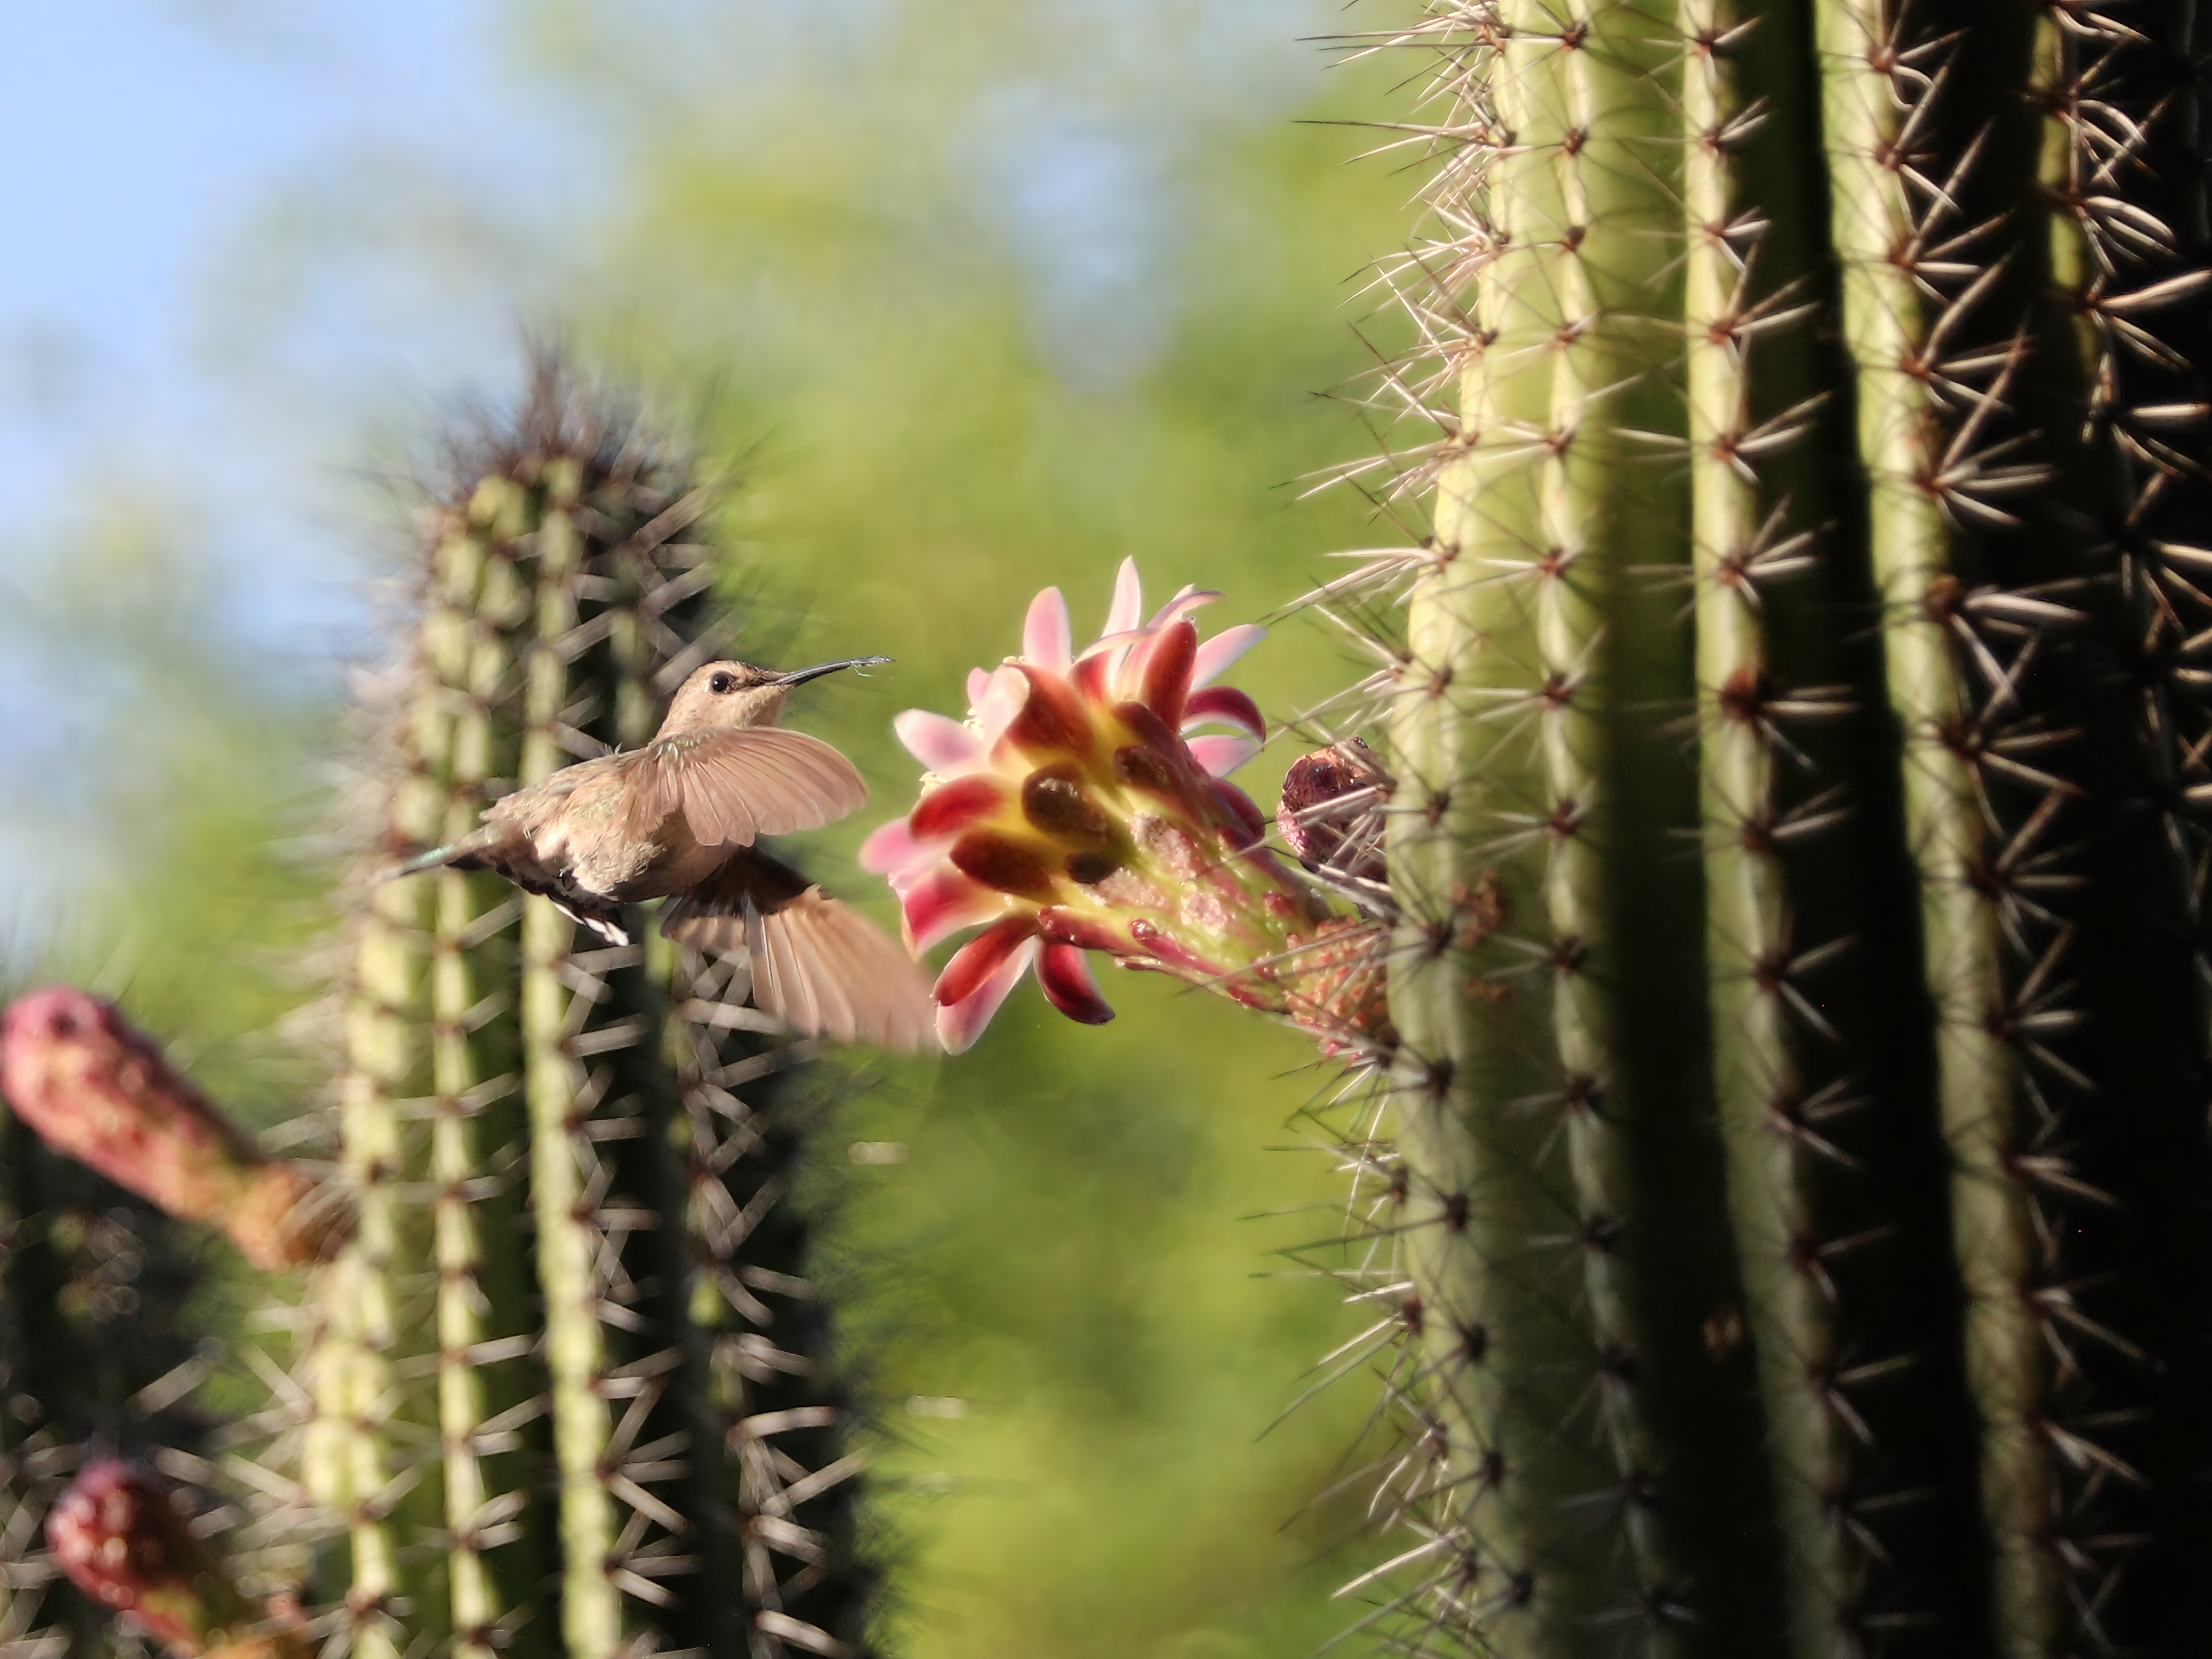 Photo by Jane Ann Griffin  |  While visiting a friend during May in Carefree I would go out on their porch and photograph the hummingbirds that would come to this cactus flower.